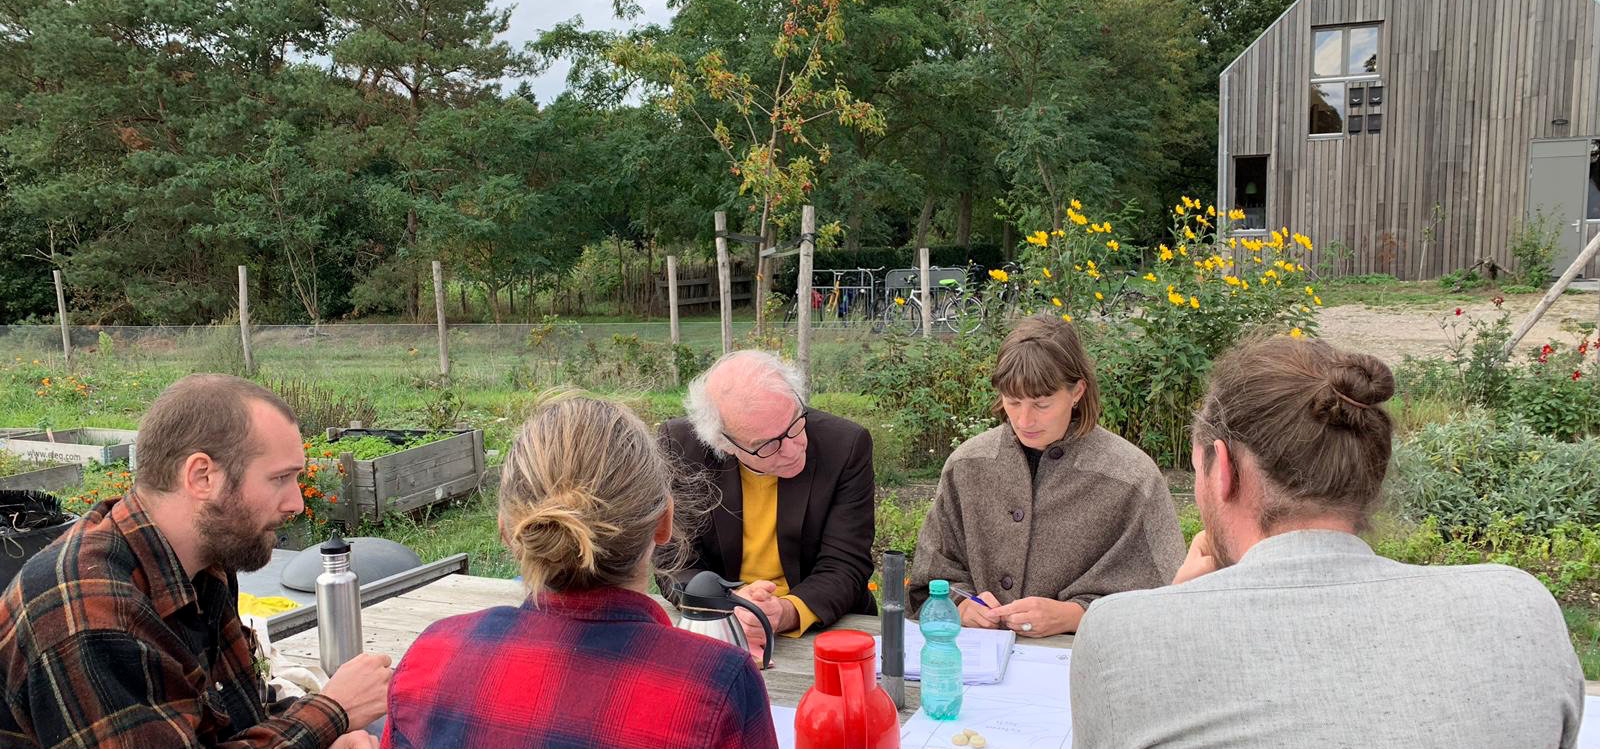 The residents offer diverse quantitative and qualitative insights - from carbon data to poems and menus - in relation to the development of Bodemzicht and Grootstal as a transition place. Feedback from residents improve the farm continuously.